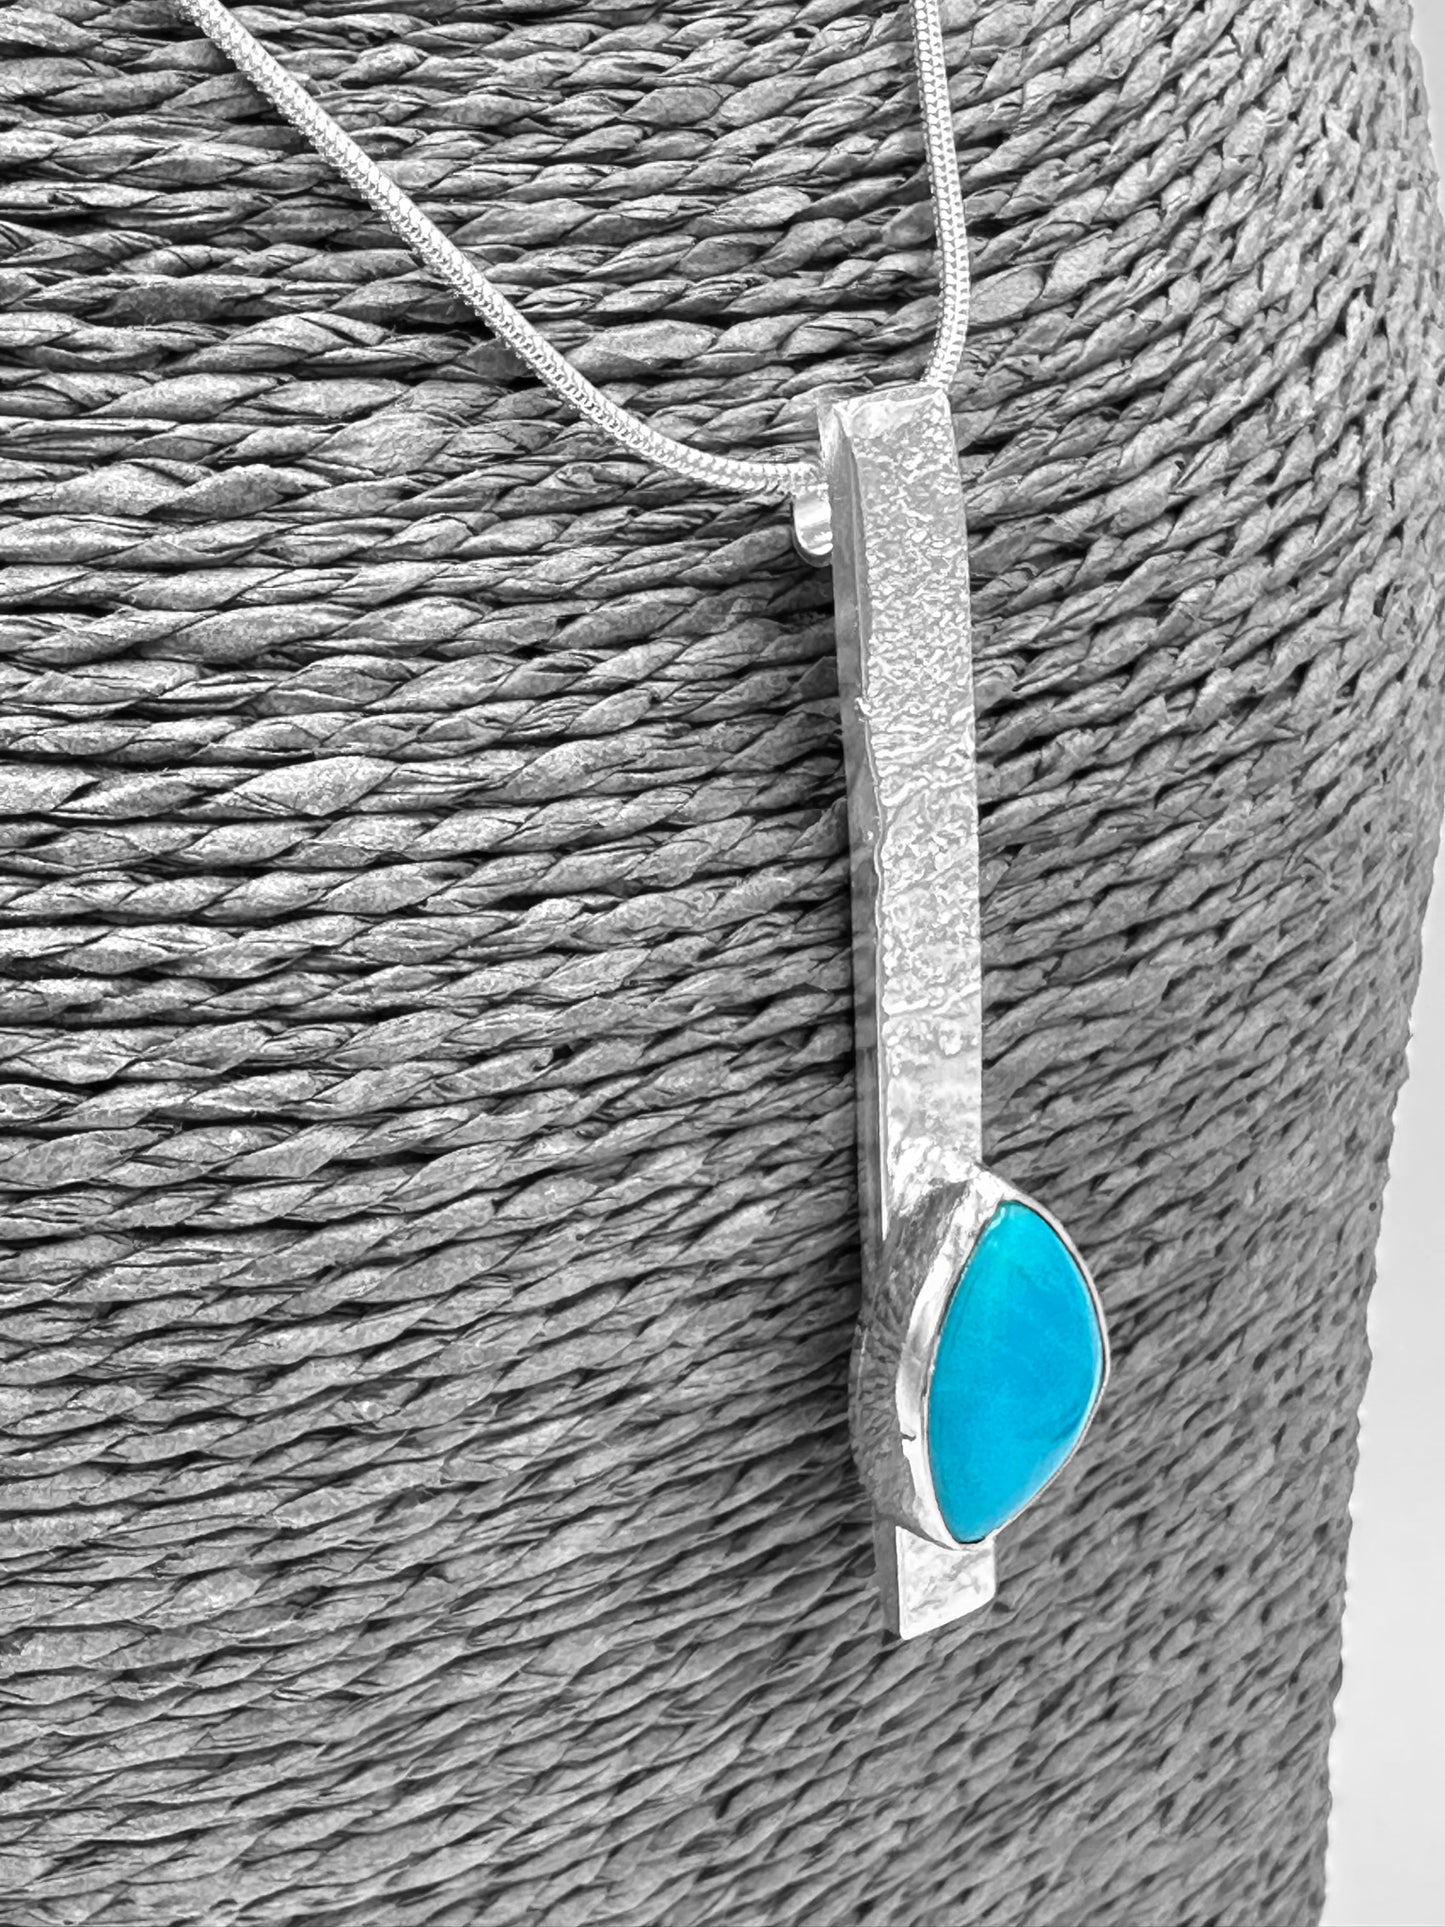 Reticulated Silver, Turquoise Pendant